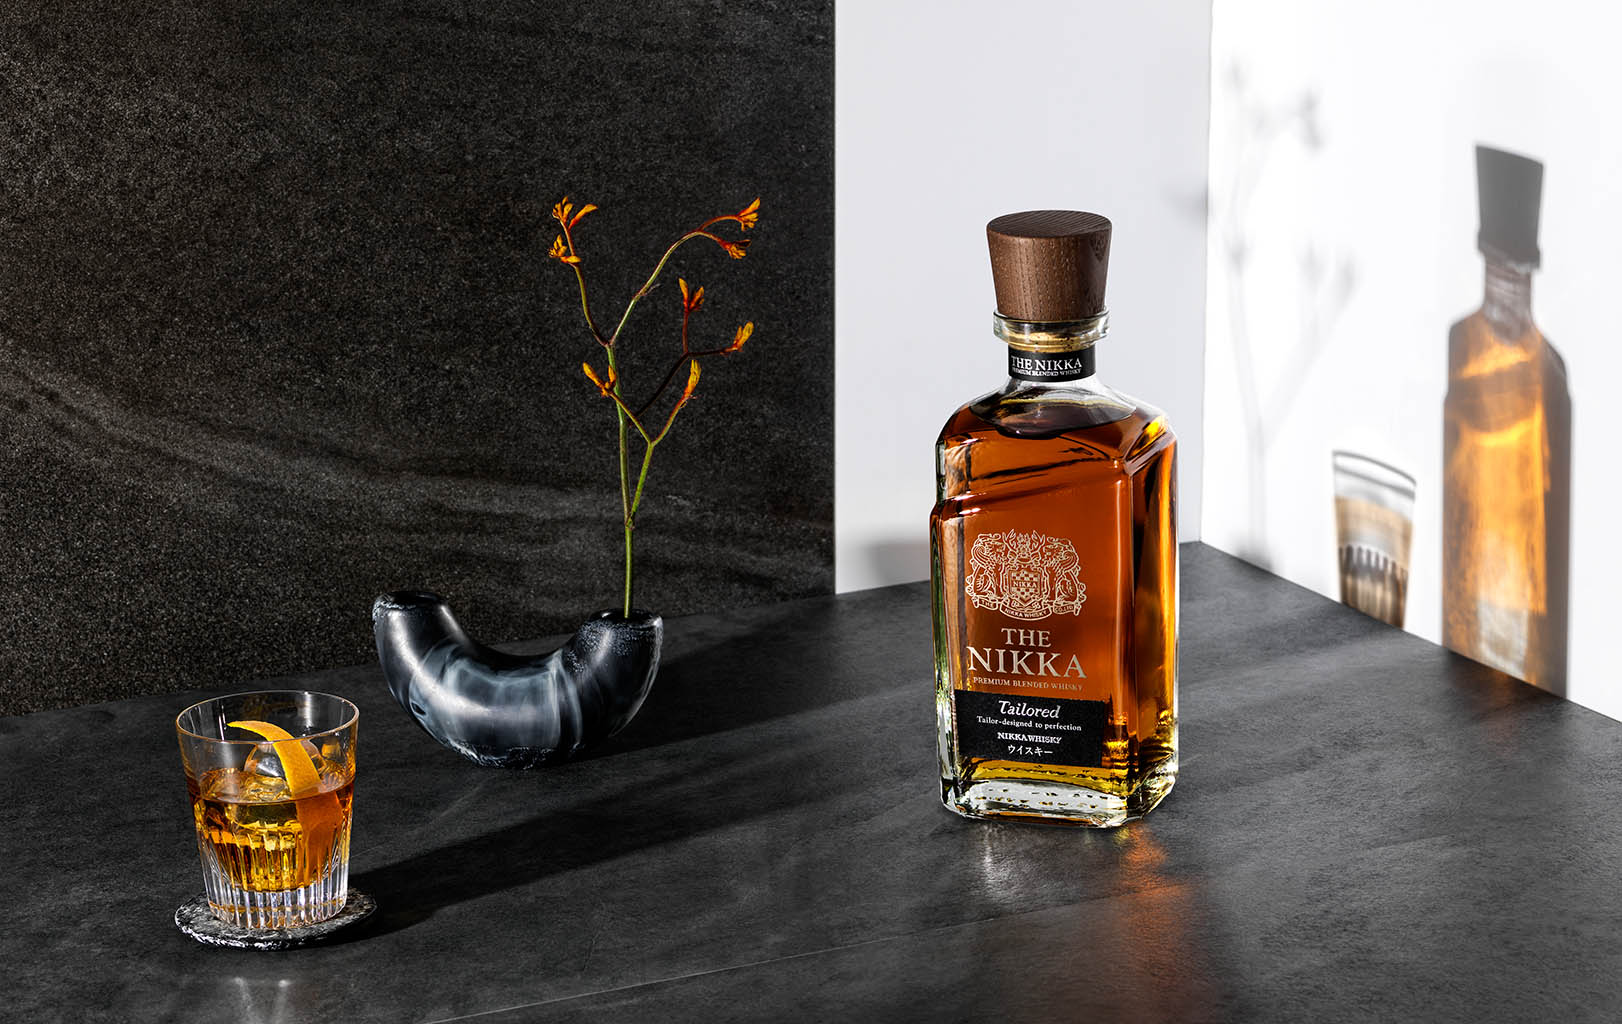 Advertising Still Life Product Photography of Nikka Whisky by Packshot Factory